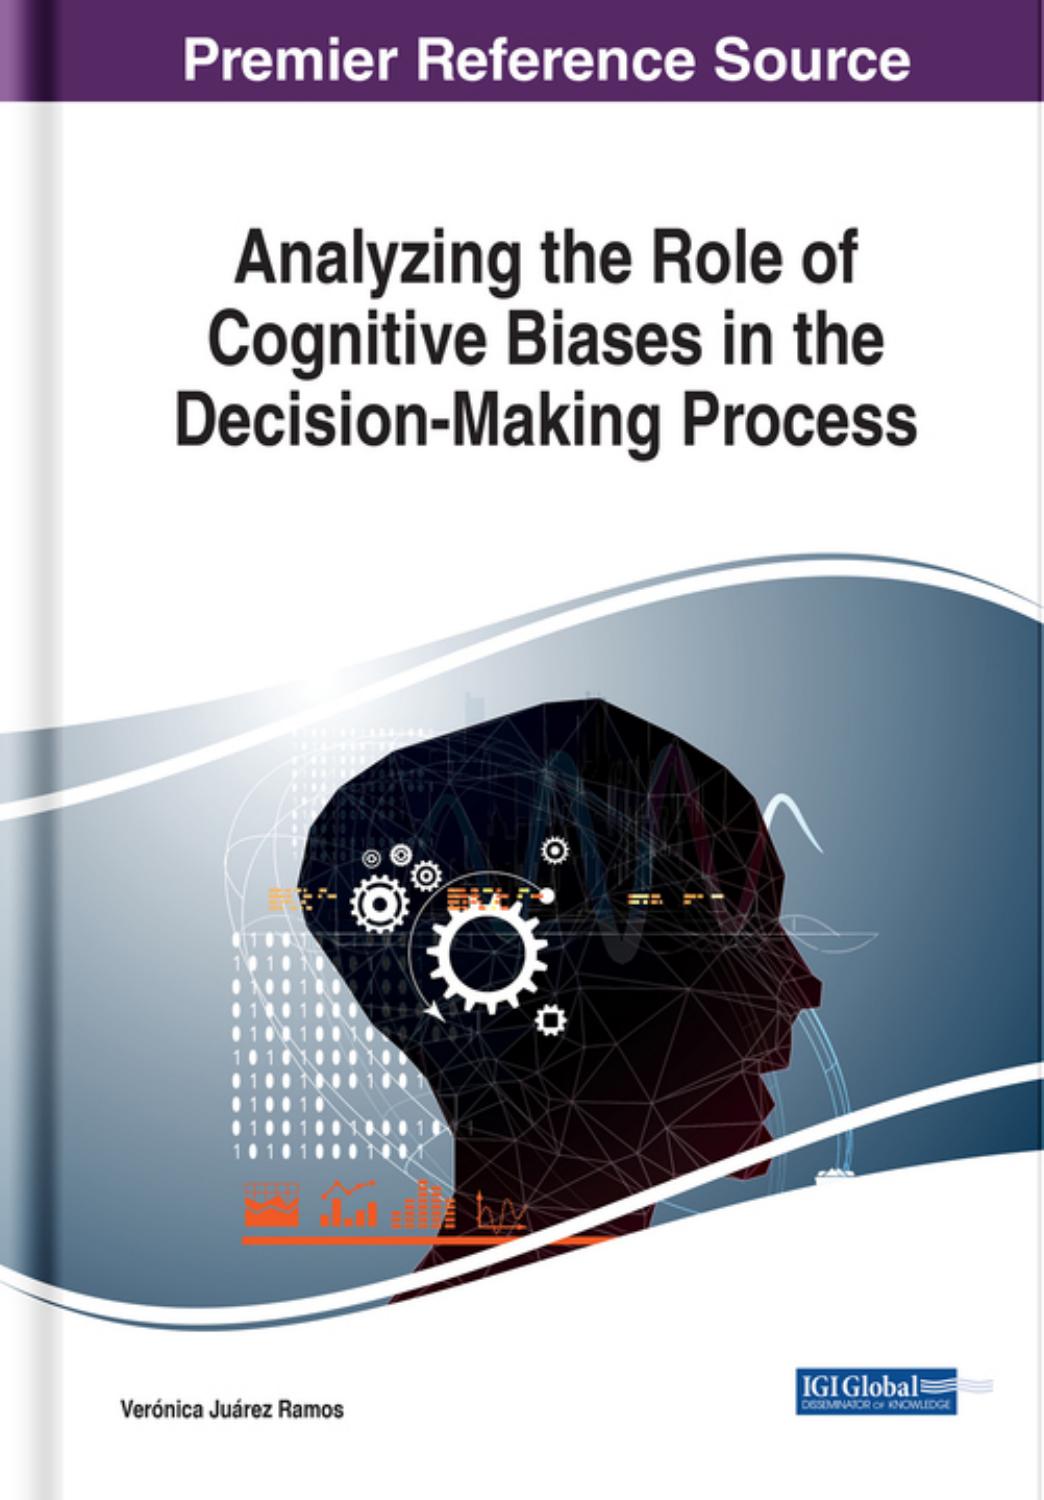 Analyzing the Role of Cognitive Biases in the Decision-Making Process